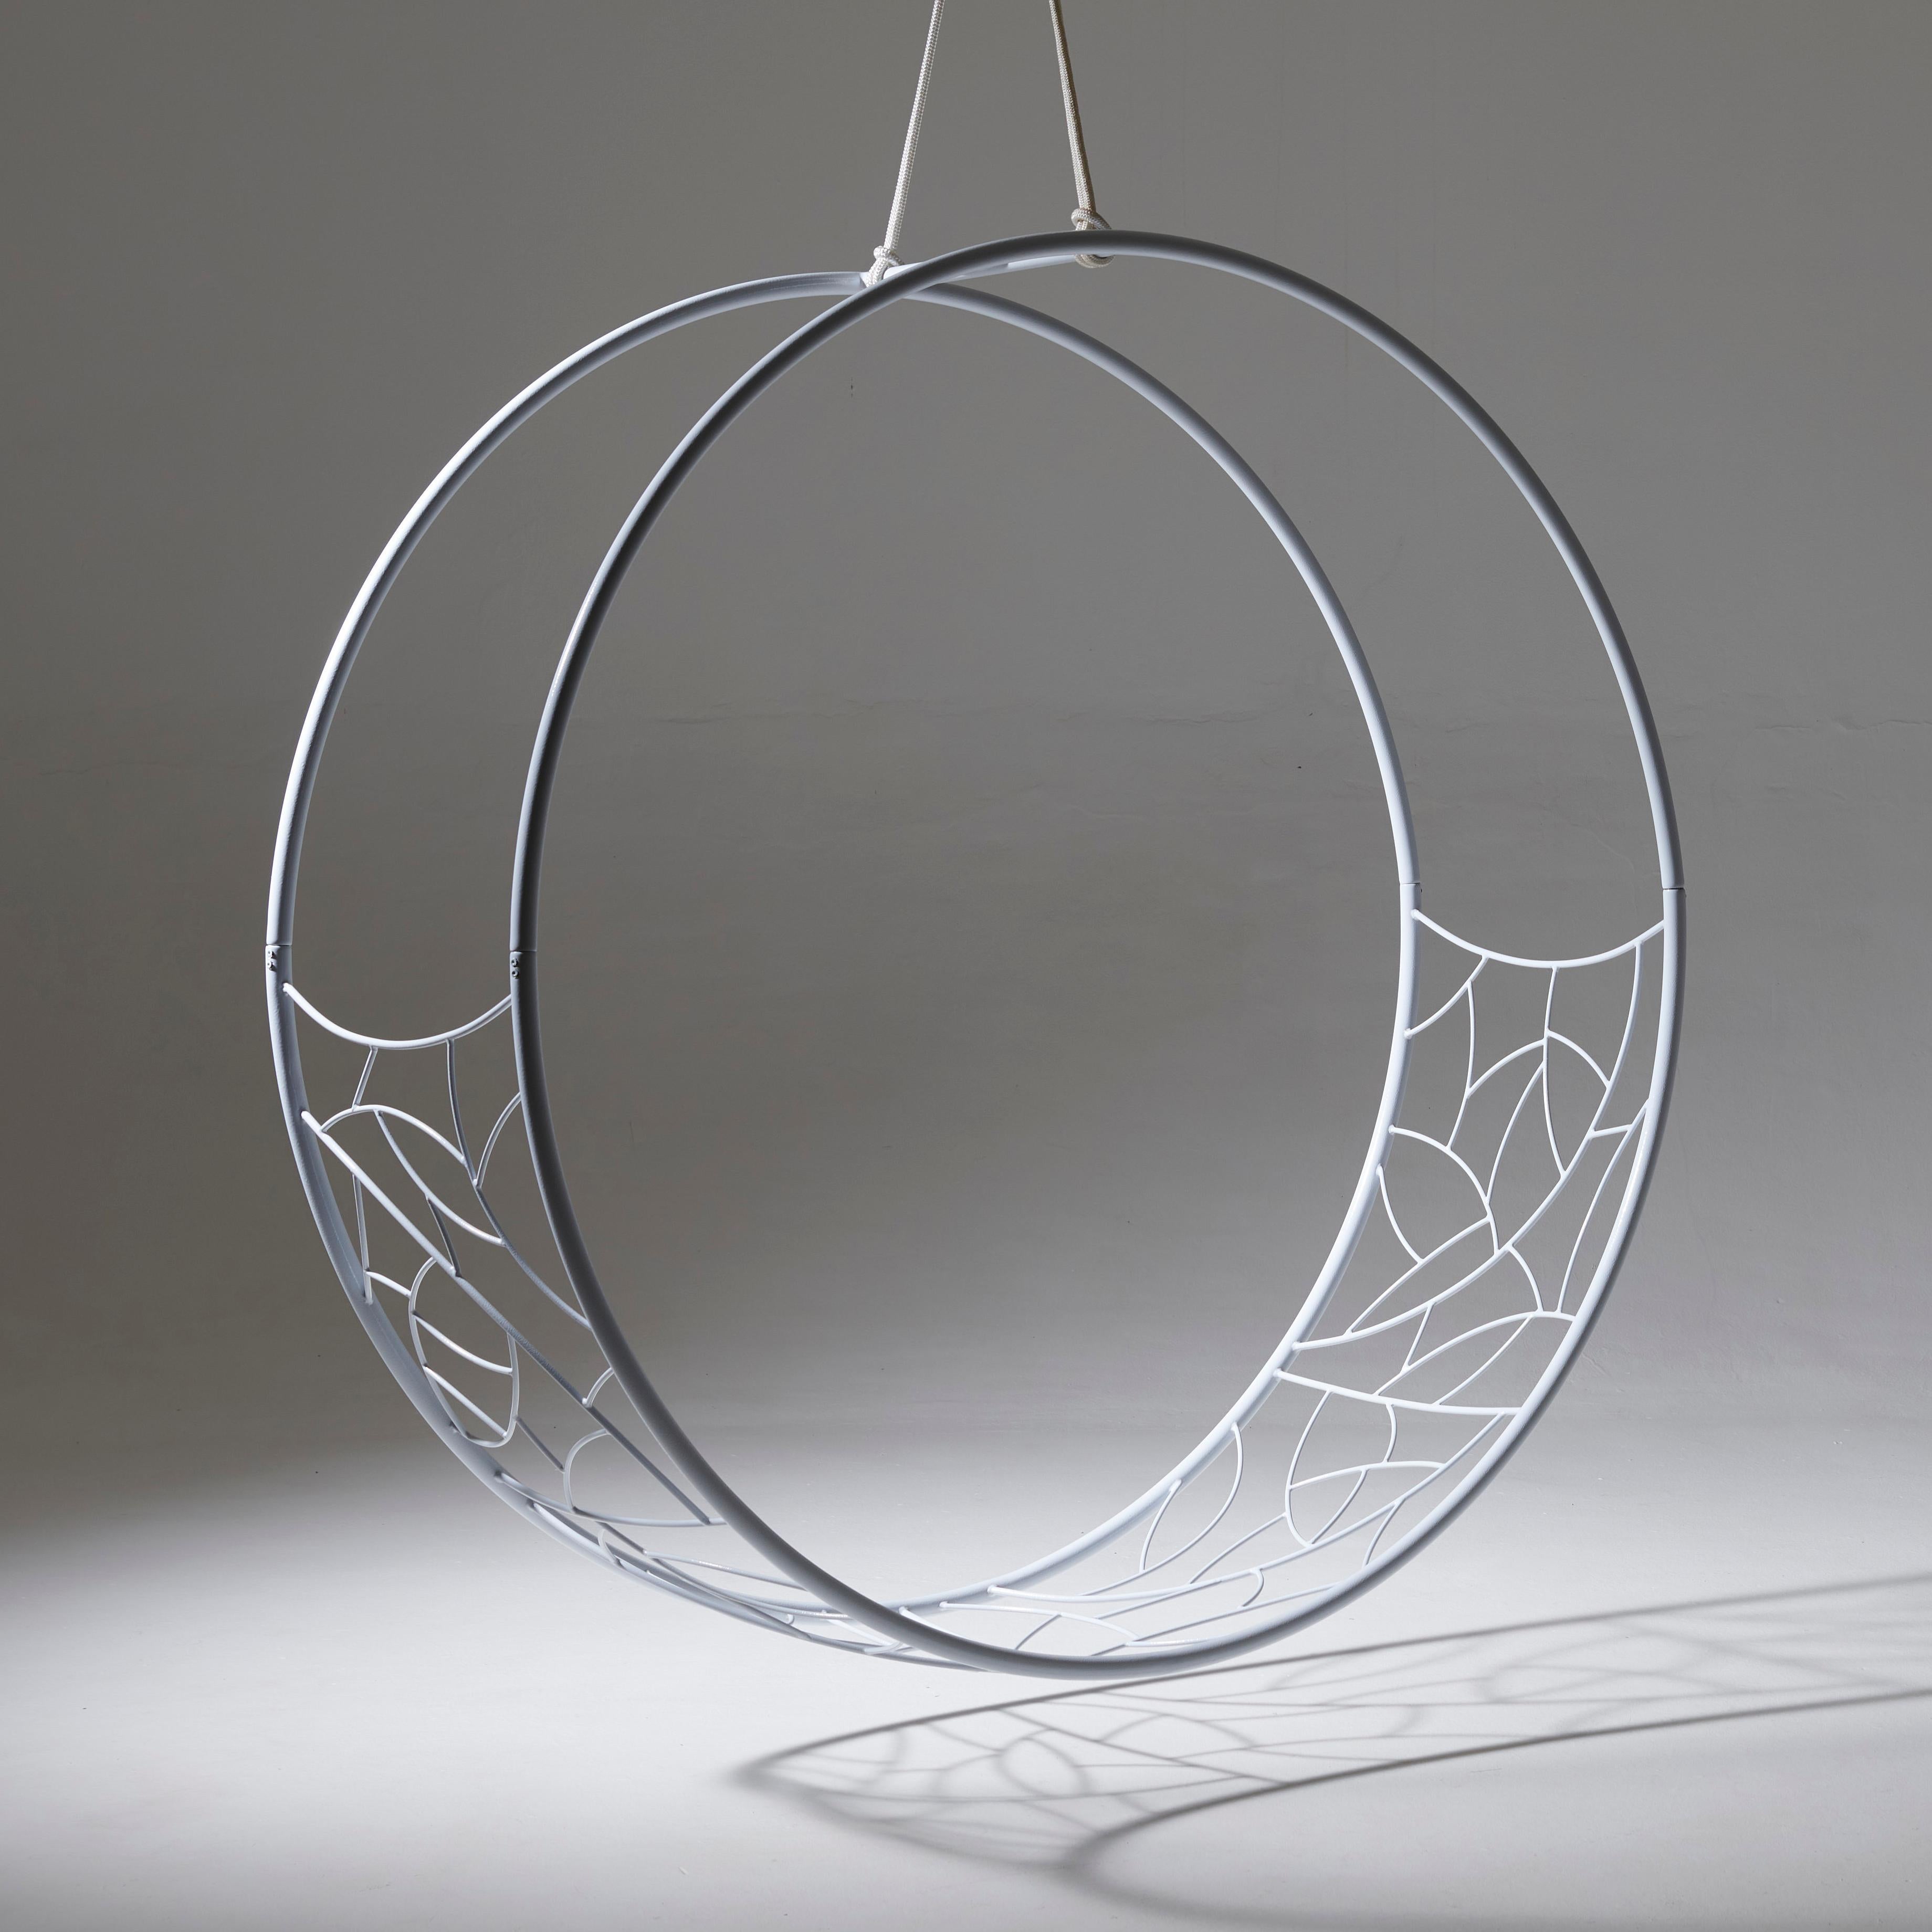 Minimalist Modern Circular Hanging Chair in Pieces for Economic Shipping For Sale